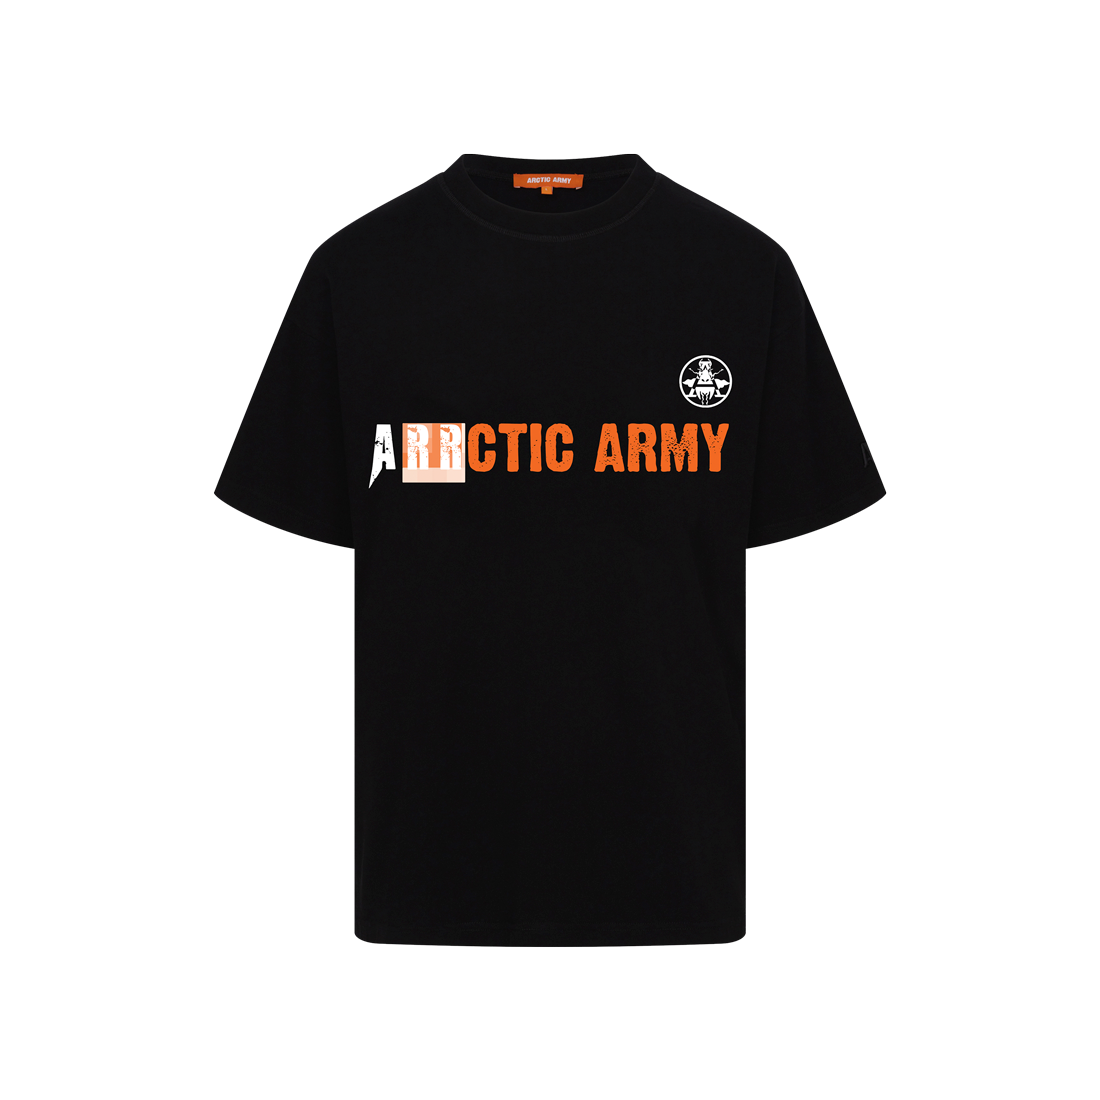 Arrdee x Arctic Army: Exclusive Black T-Shirt